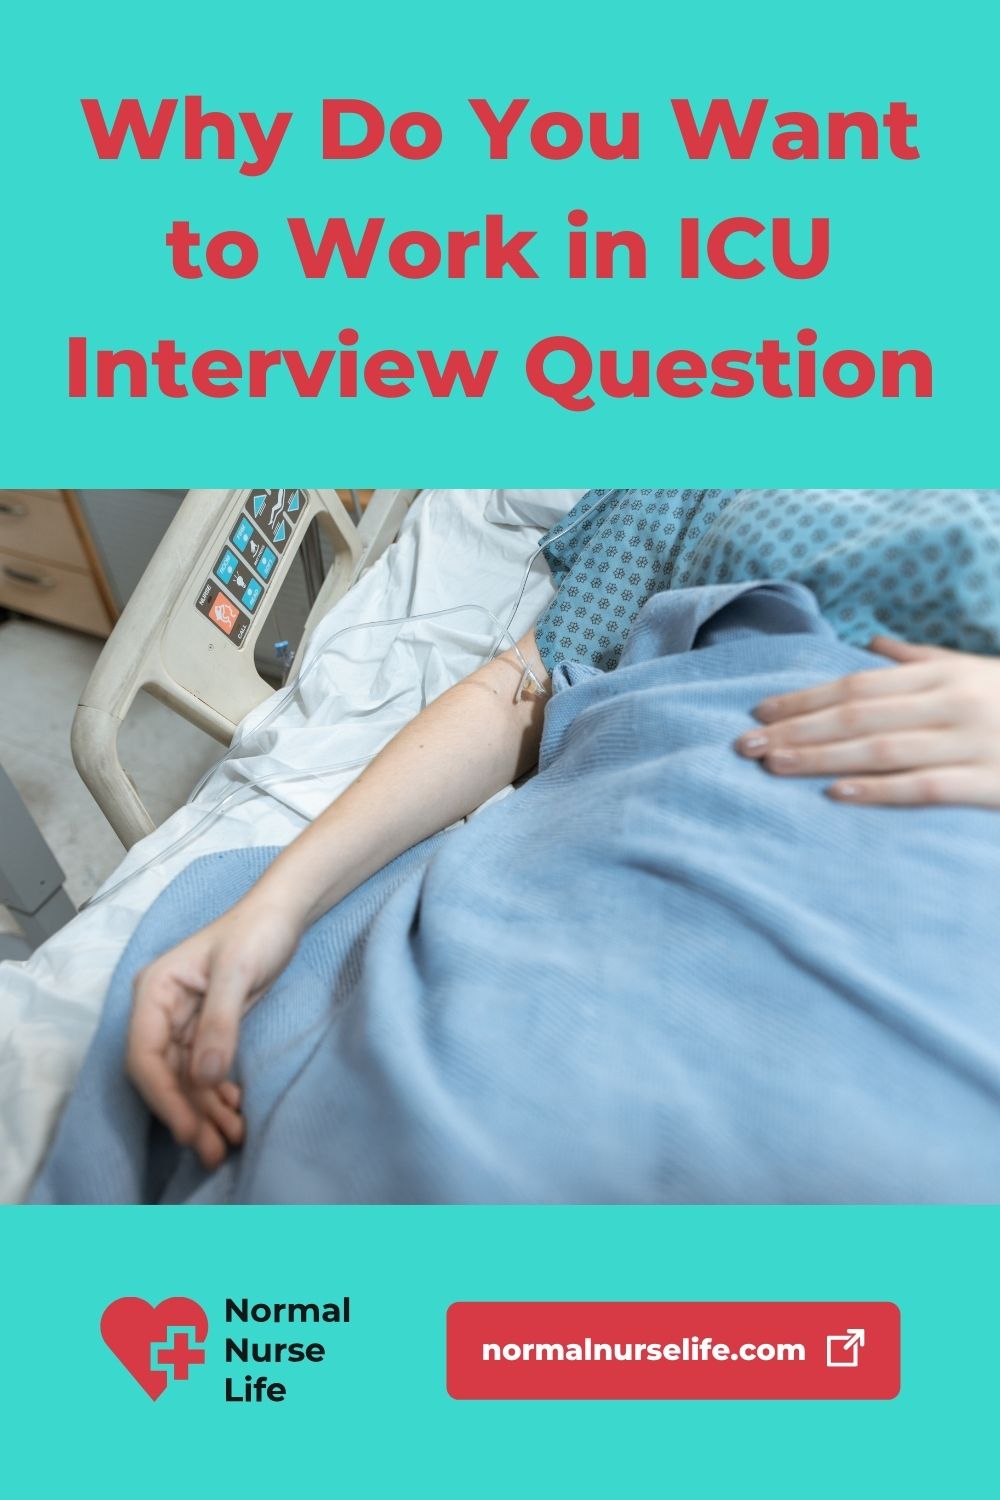 Why do you want to work in ICU interview question